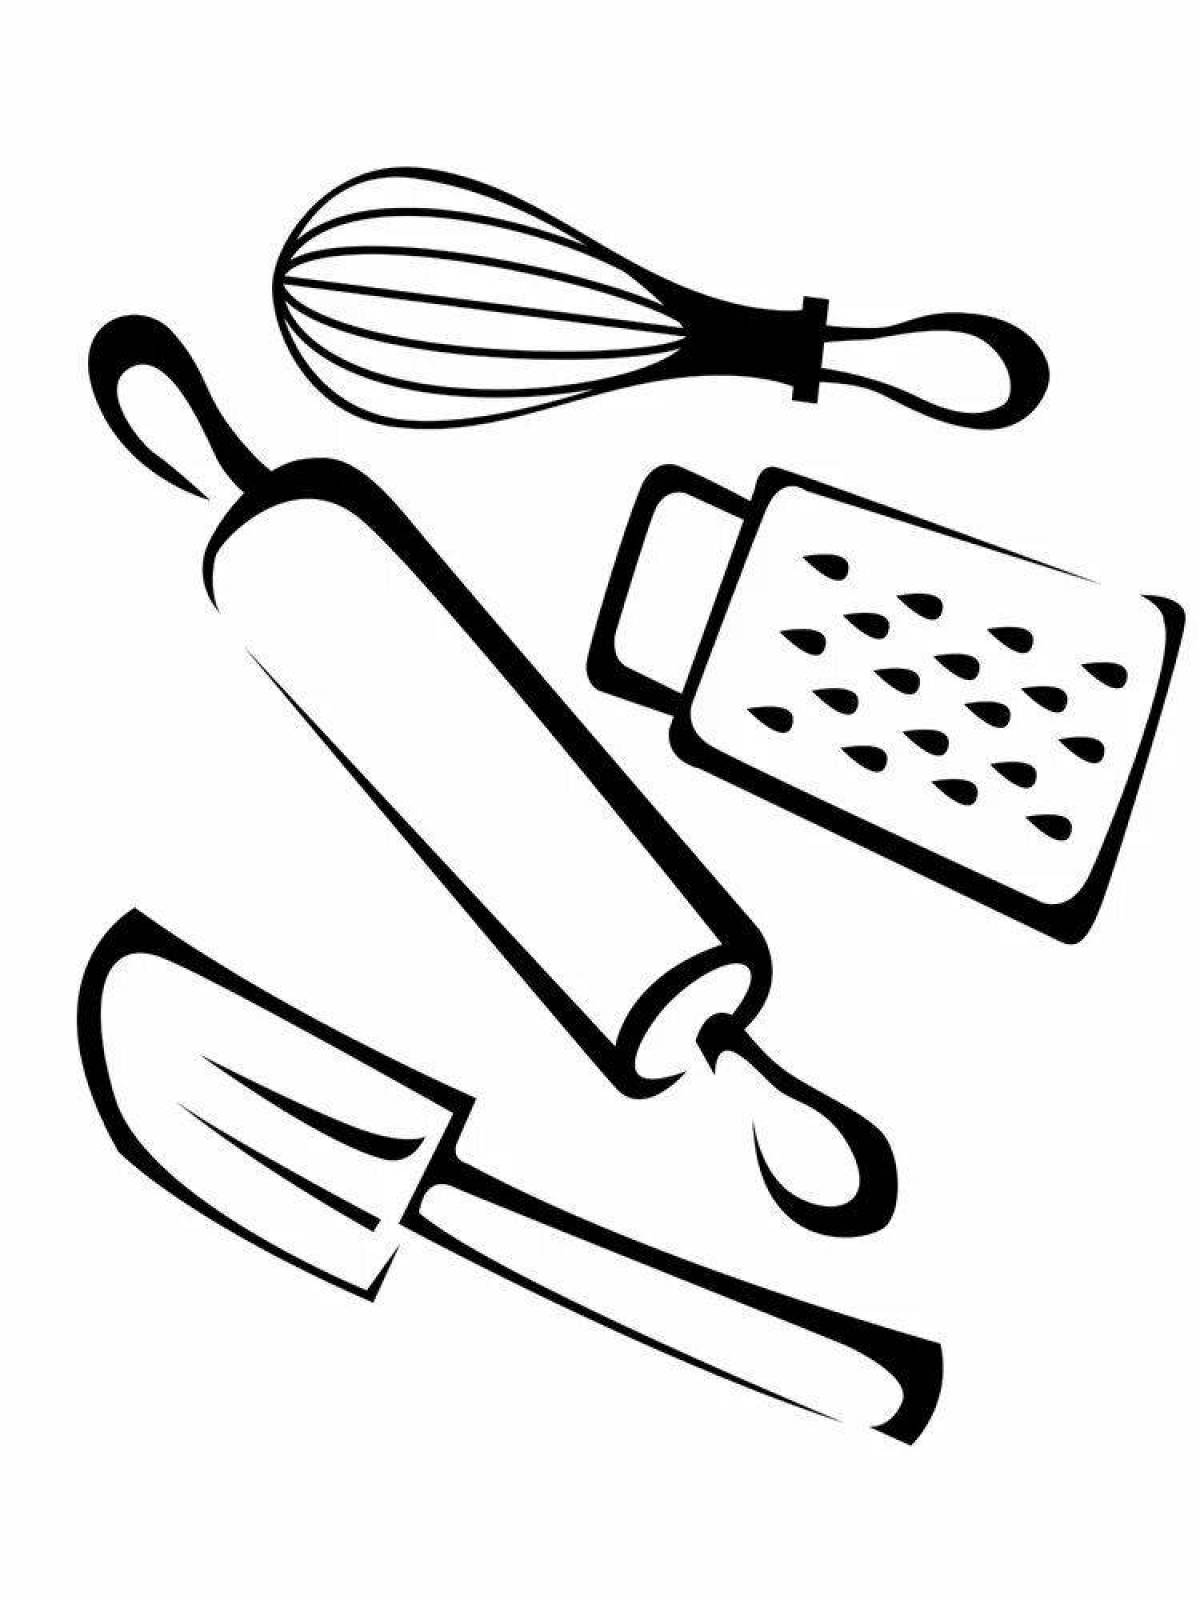 Coloring book funny kitchen appliances